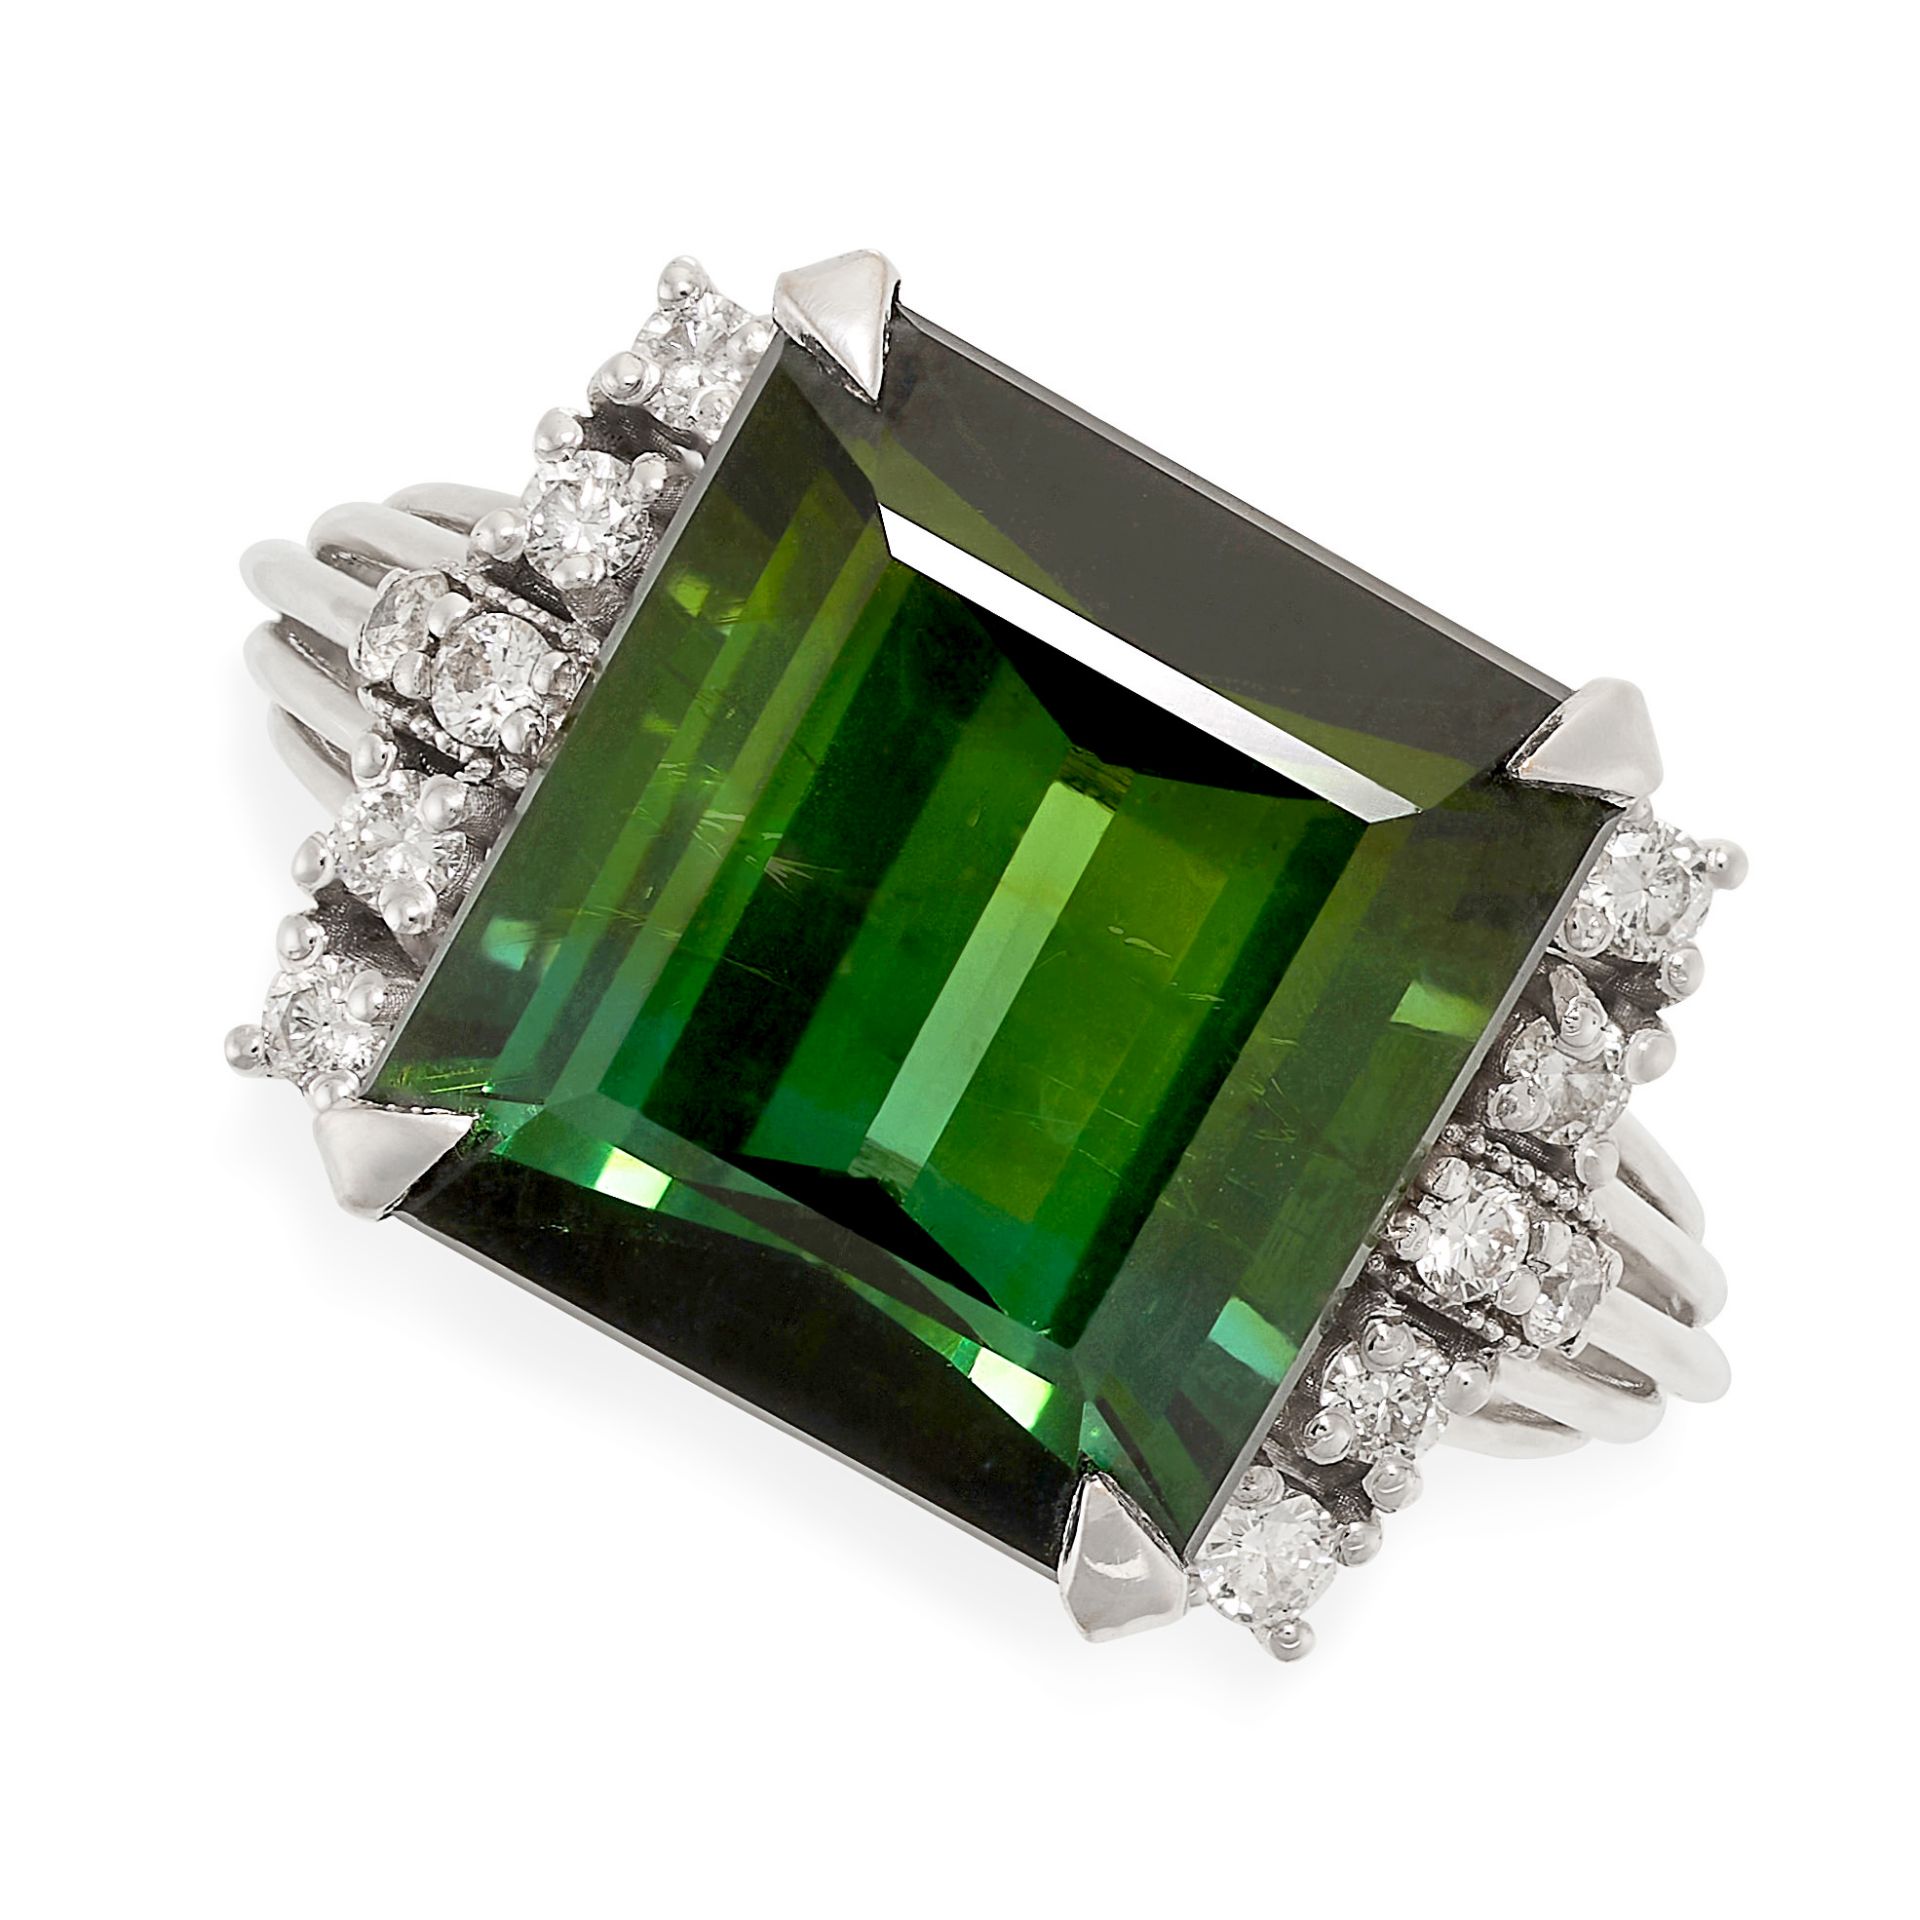 A GREEN TOURMALINE AND DIAMOND RING in white gold, set with an emerald cut green tourmaline of 10.25